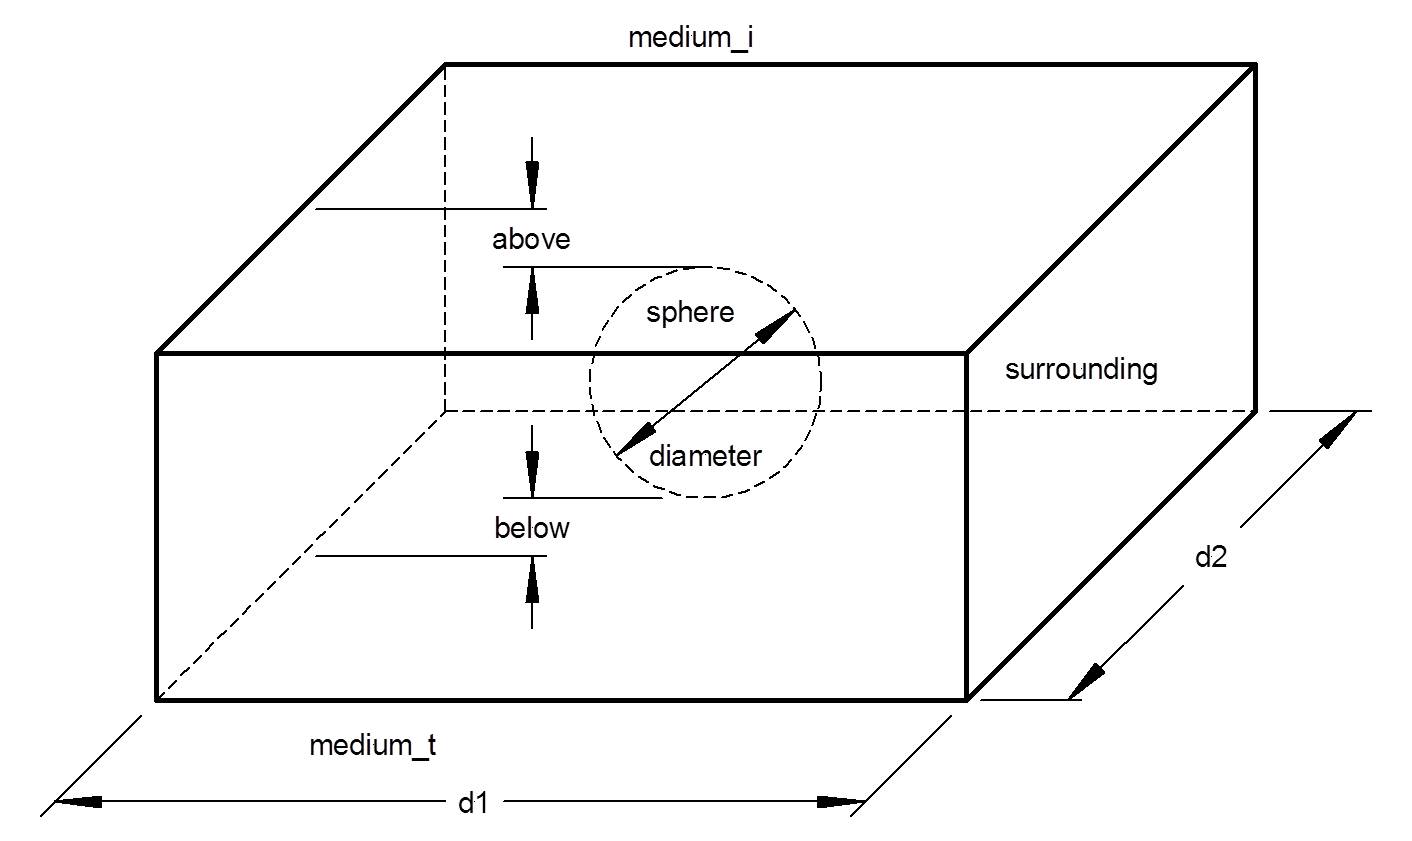 Diagram showing a unit cell consisting of a layer with an embedded sphere.